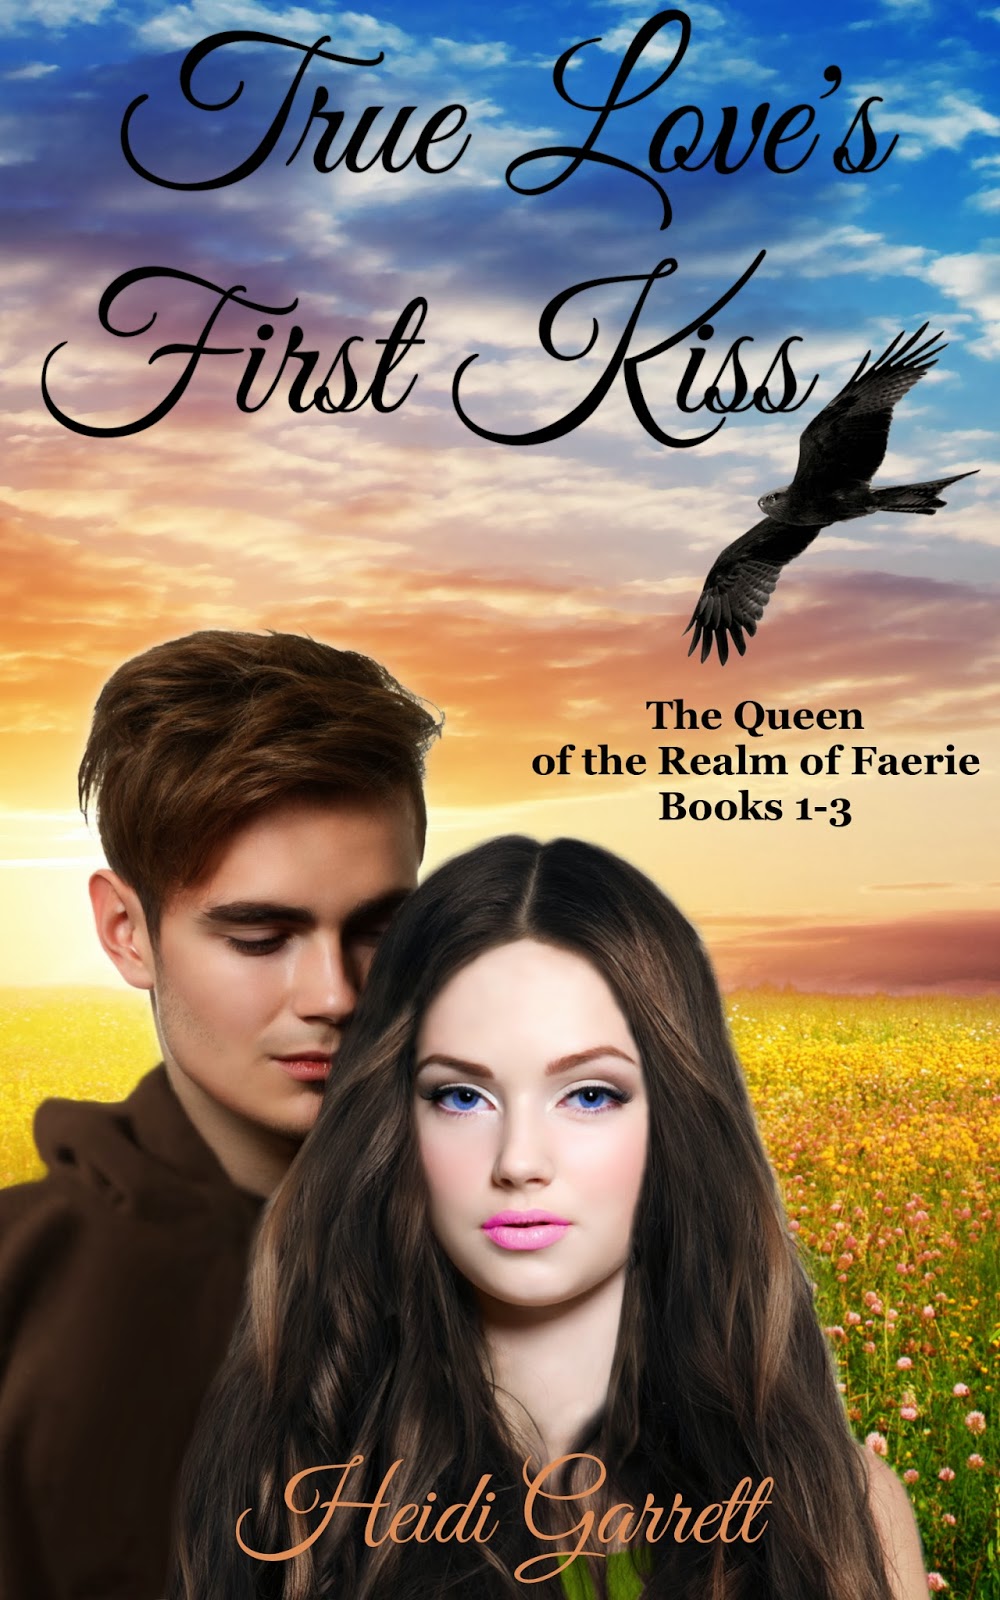 Book Reviews from a Christian Gal Review of Book 1 of True Loves First